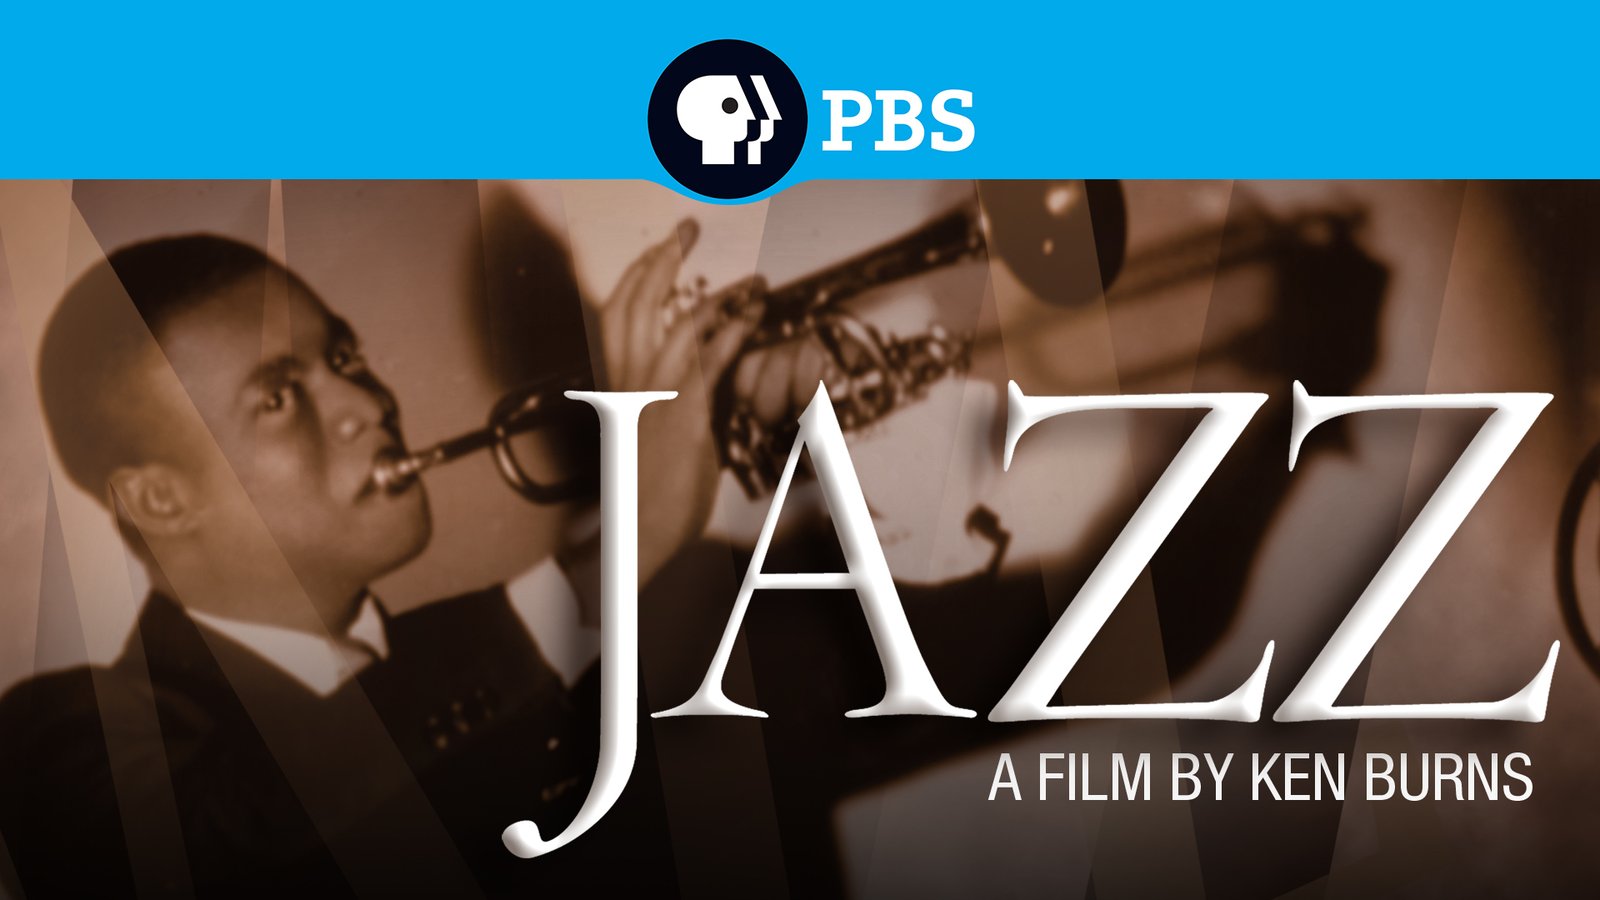 Jazz: A Film by Ken Burns - The History of Jazz Music in America